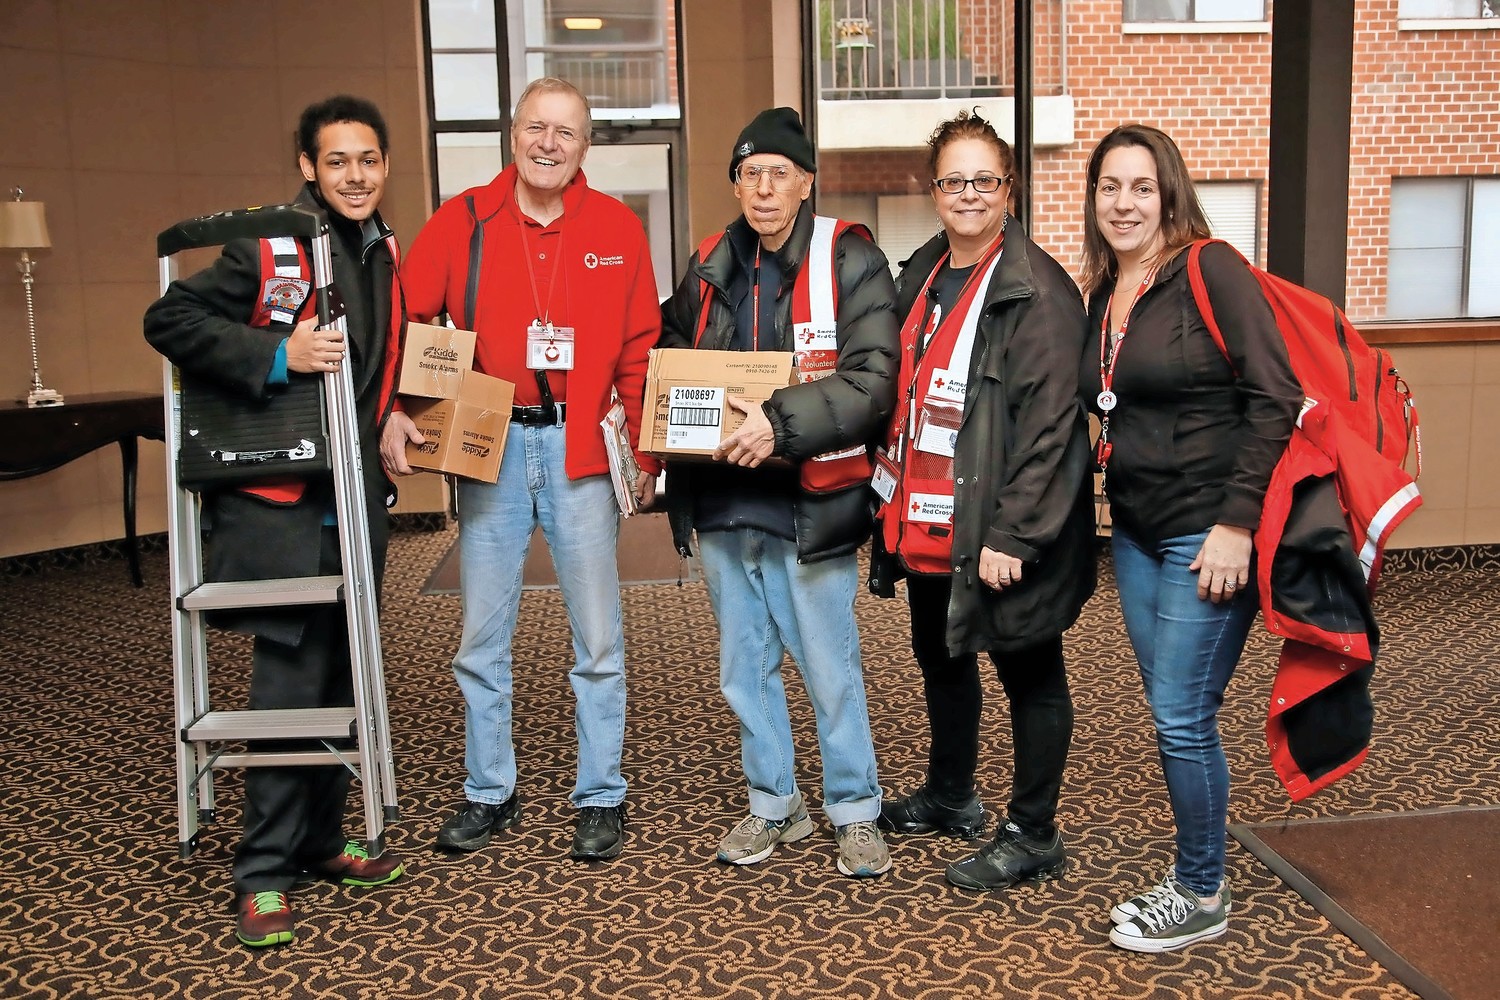 Dominic Jenkins, left, Paul Nulty, Peter King, Karen Serani and Lori-Ann Pizzarelli, helped install smoke alarms on Feb. 24 as volunteers for the American Red Cross.